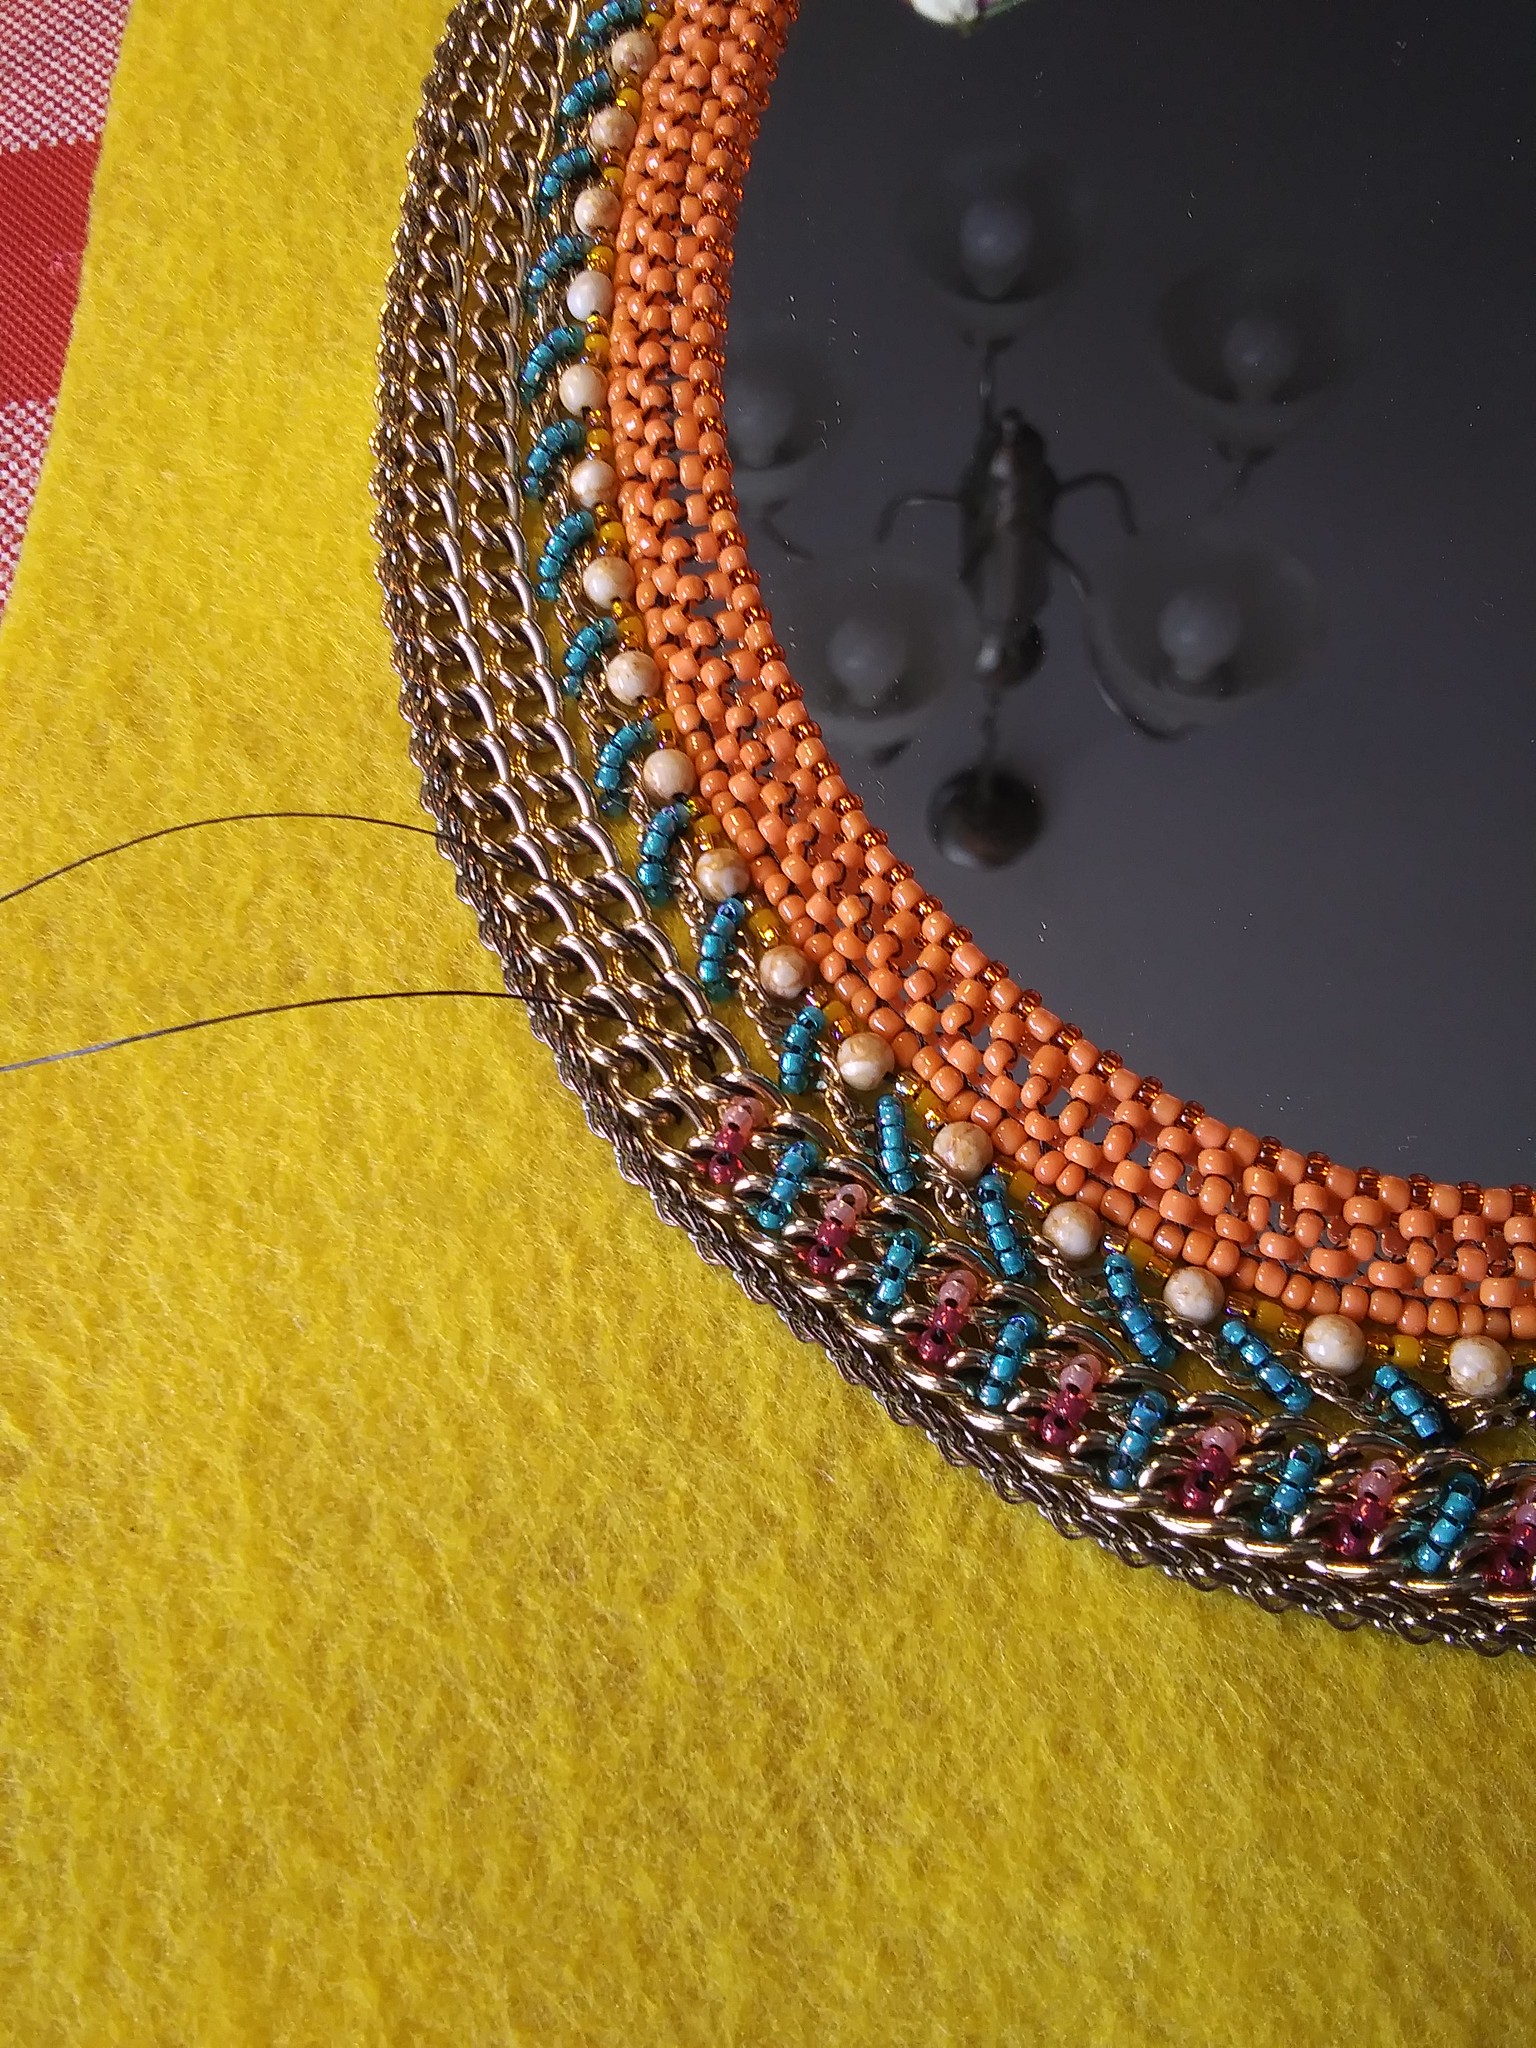 jewelry chain as an embroidery material